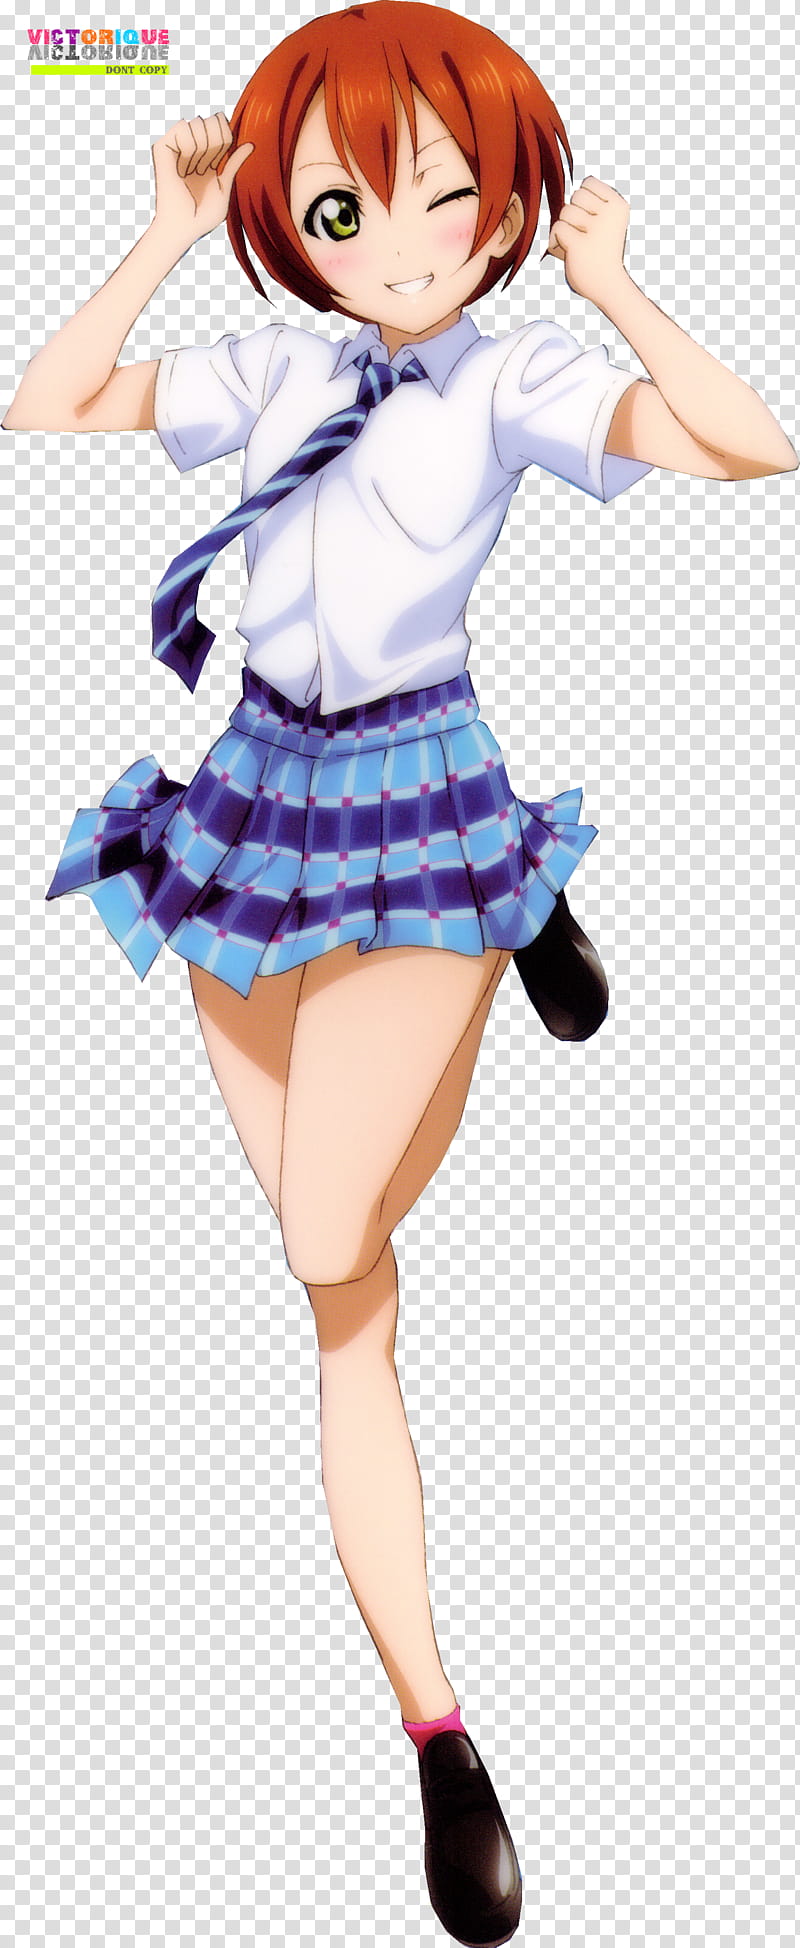 Love Live Anime Render, female animated character art transparent background PNG clipart